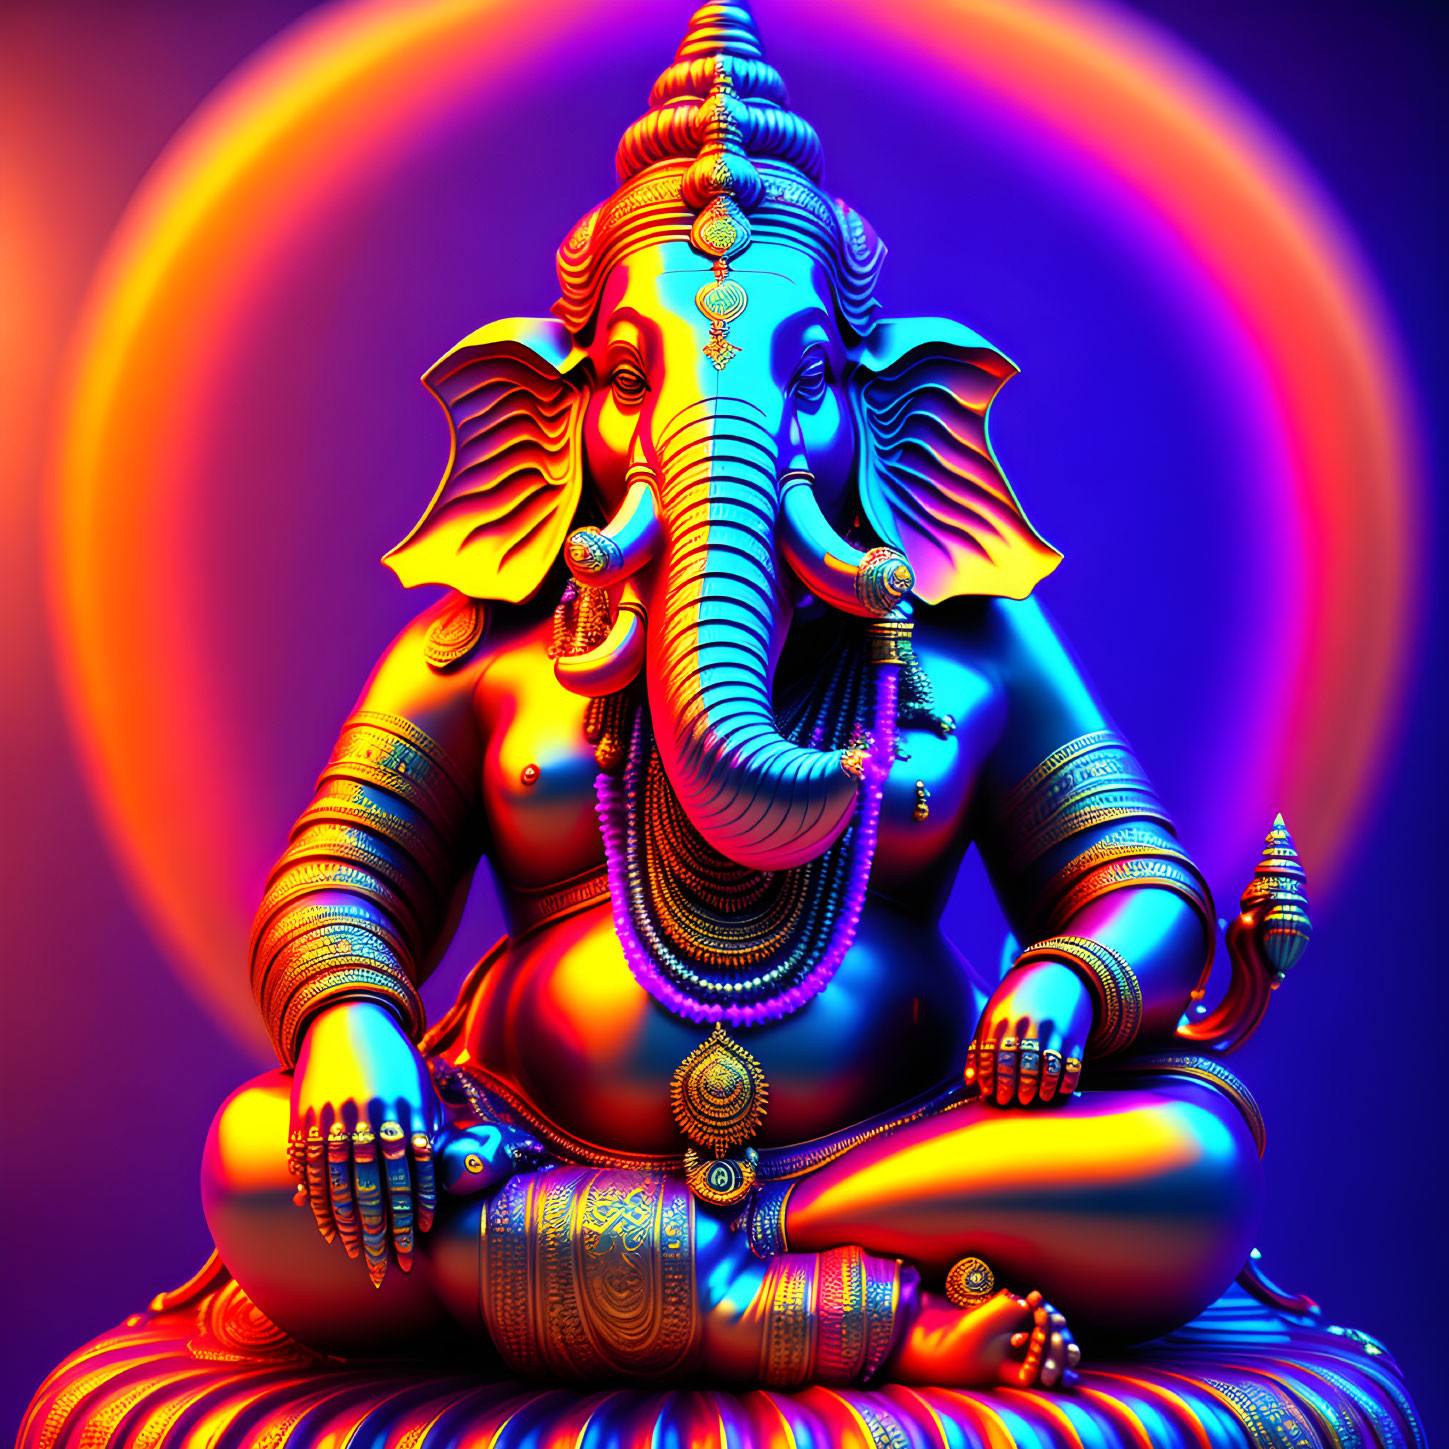 Detailed digital art of Lord Ganesha seated in lotus position, with vibrant aura and ornate